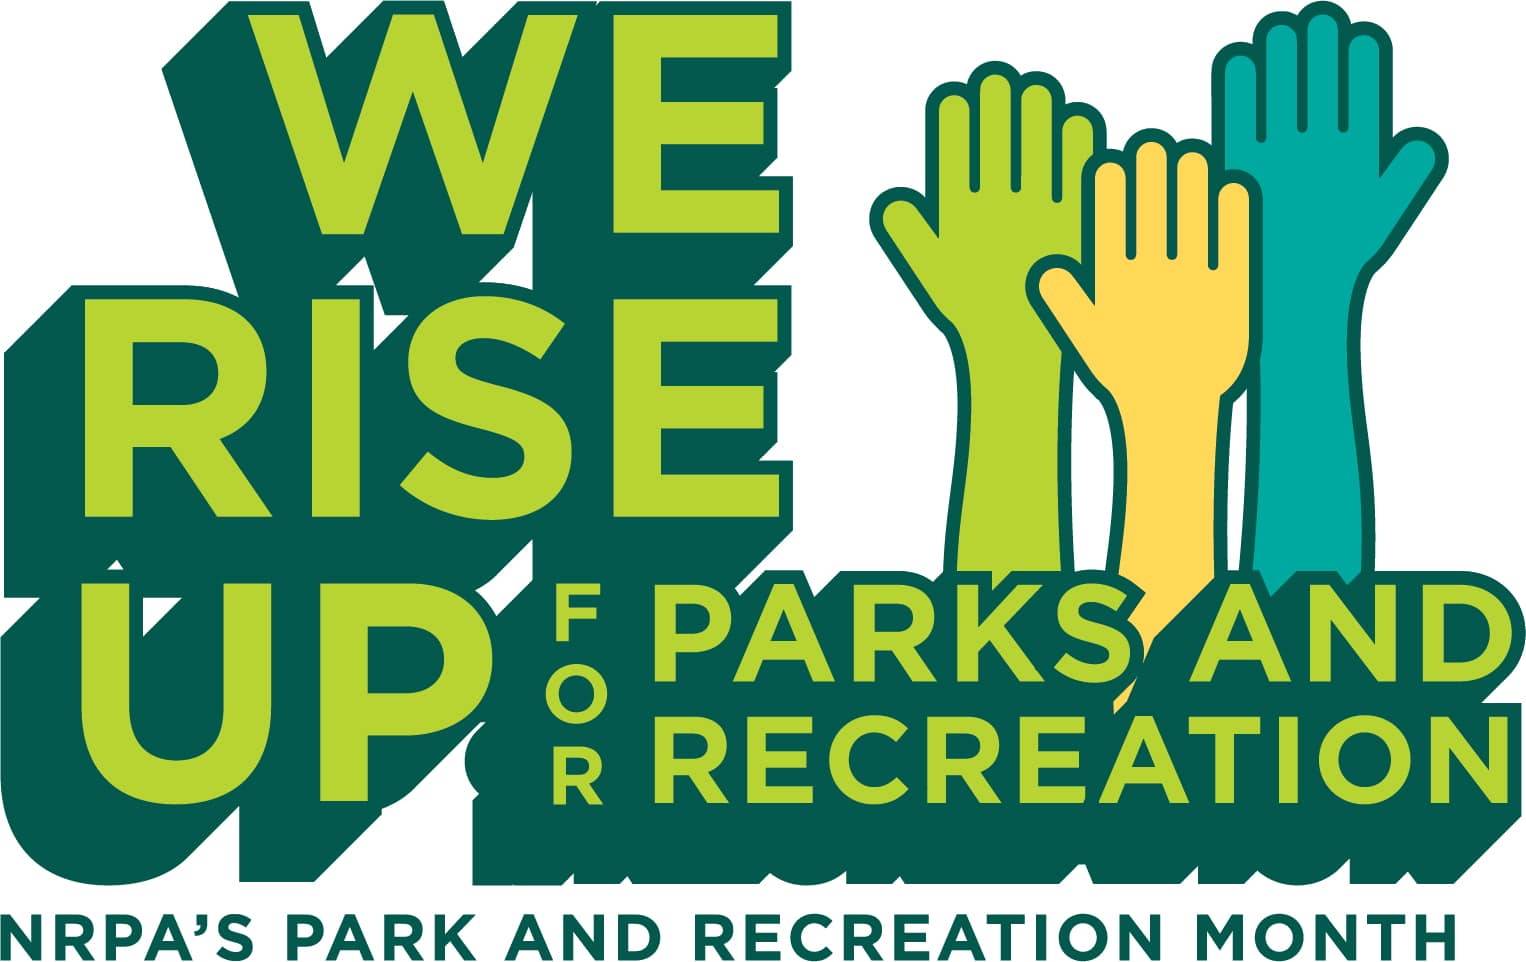 Parks and Recreation Month logo. Hands raised up to show support